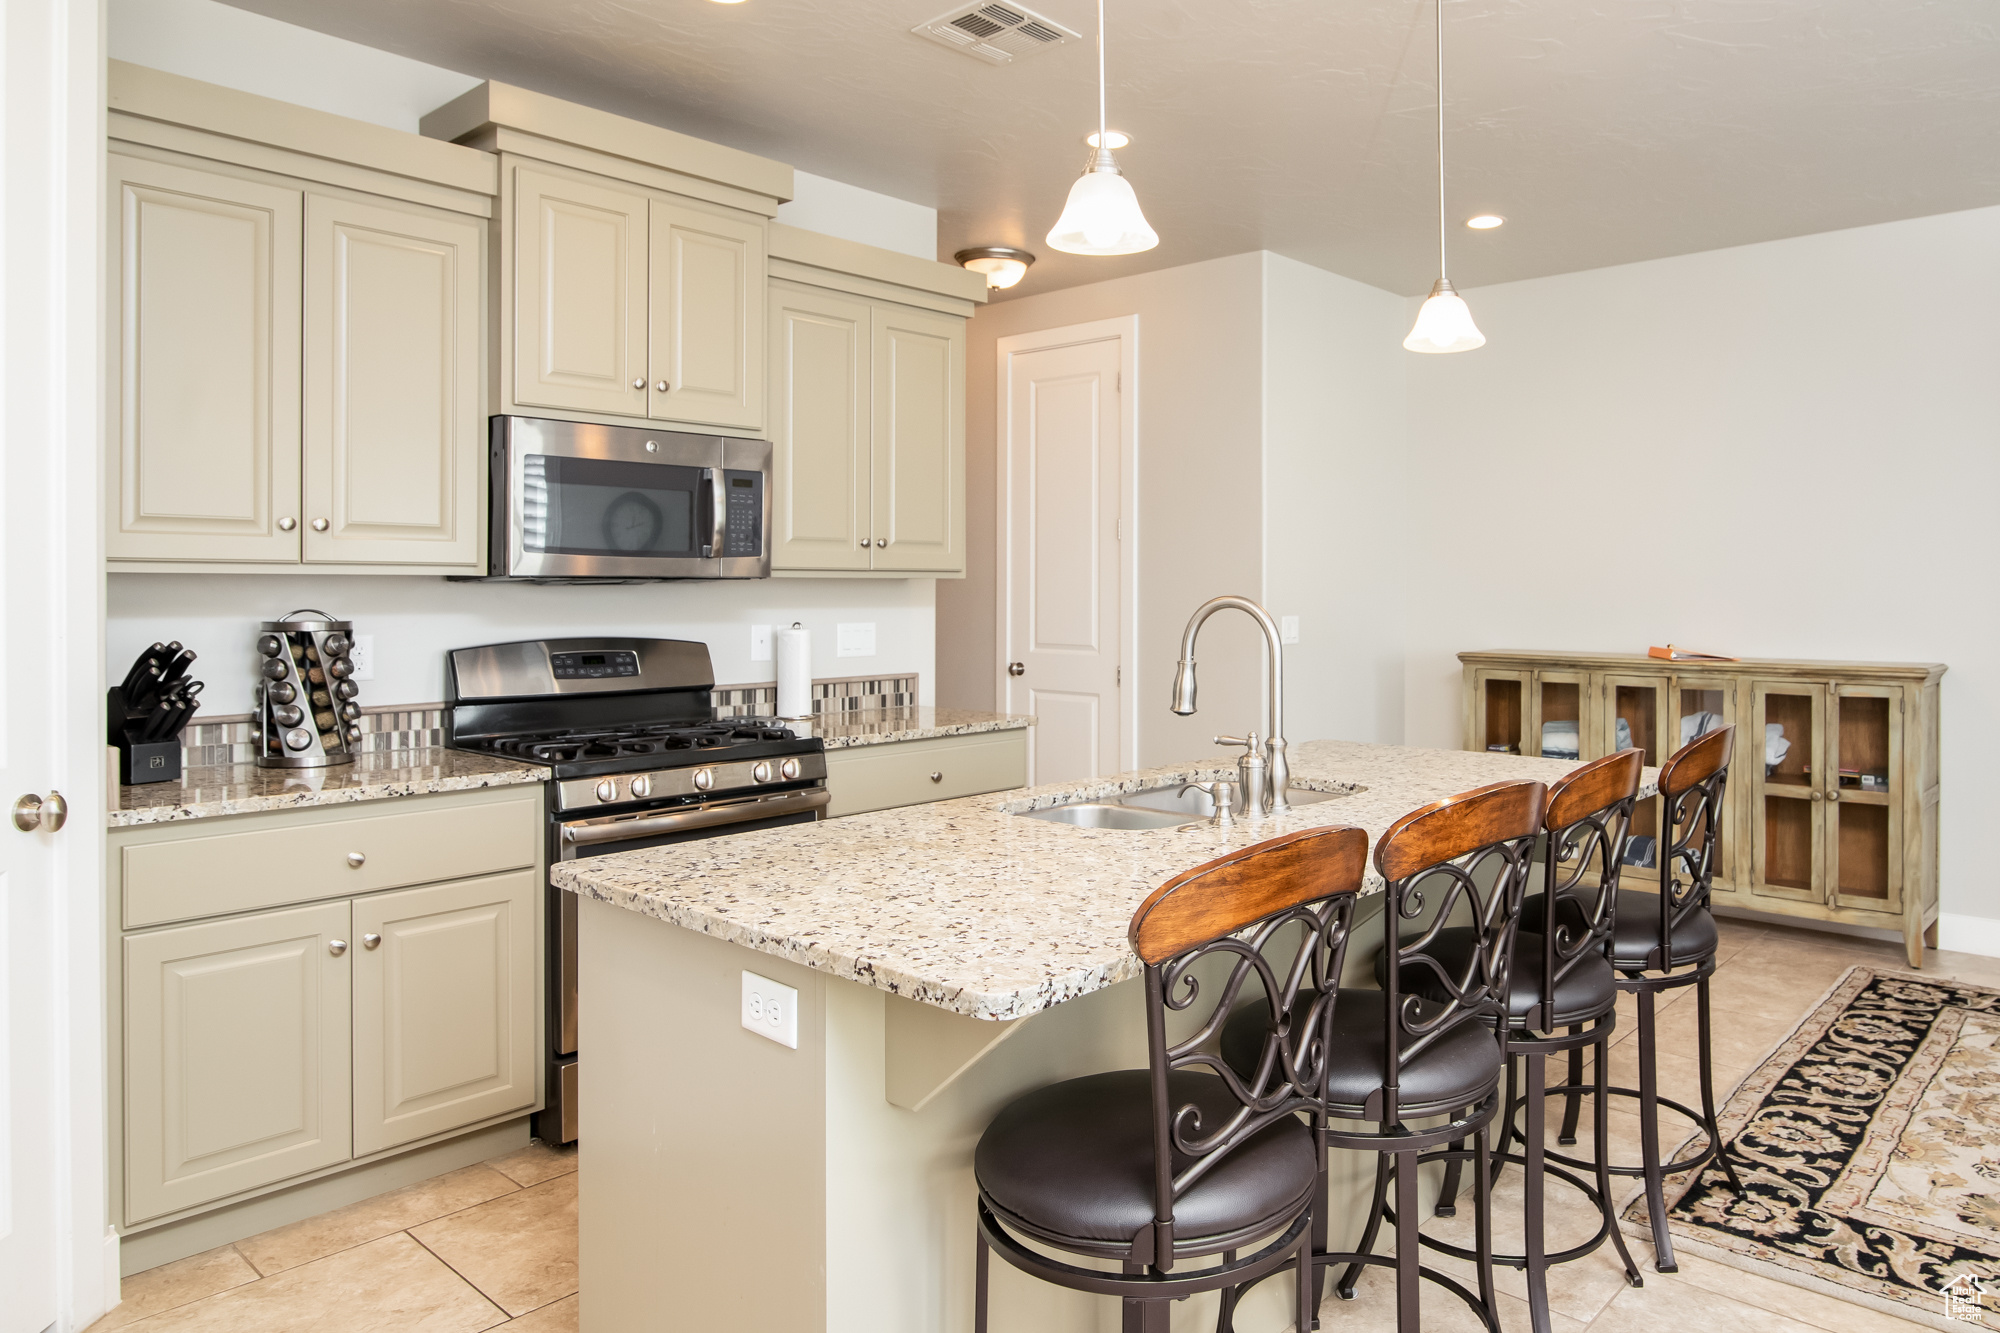 Kitchen with pendant lighting, appliances with stainless steel finishes, light tile floors, a center island with granite countertops, and cream cabinetry